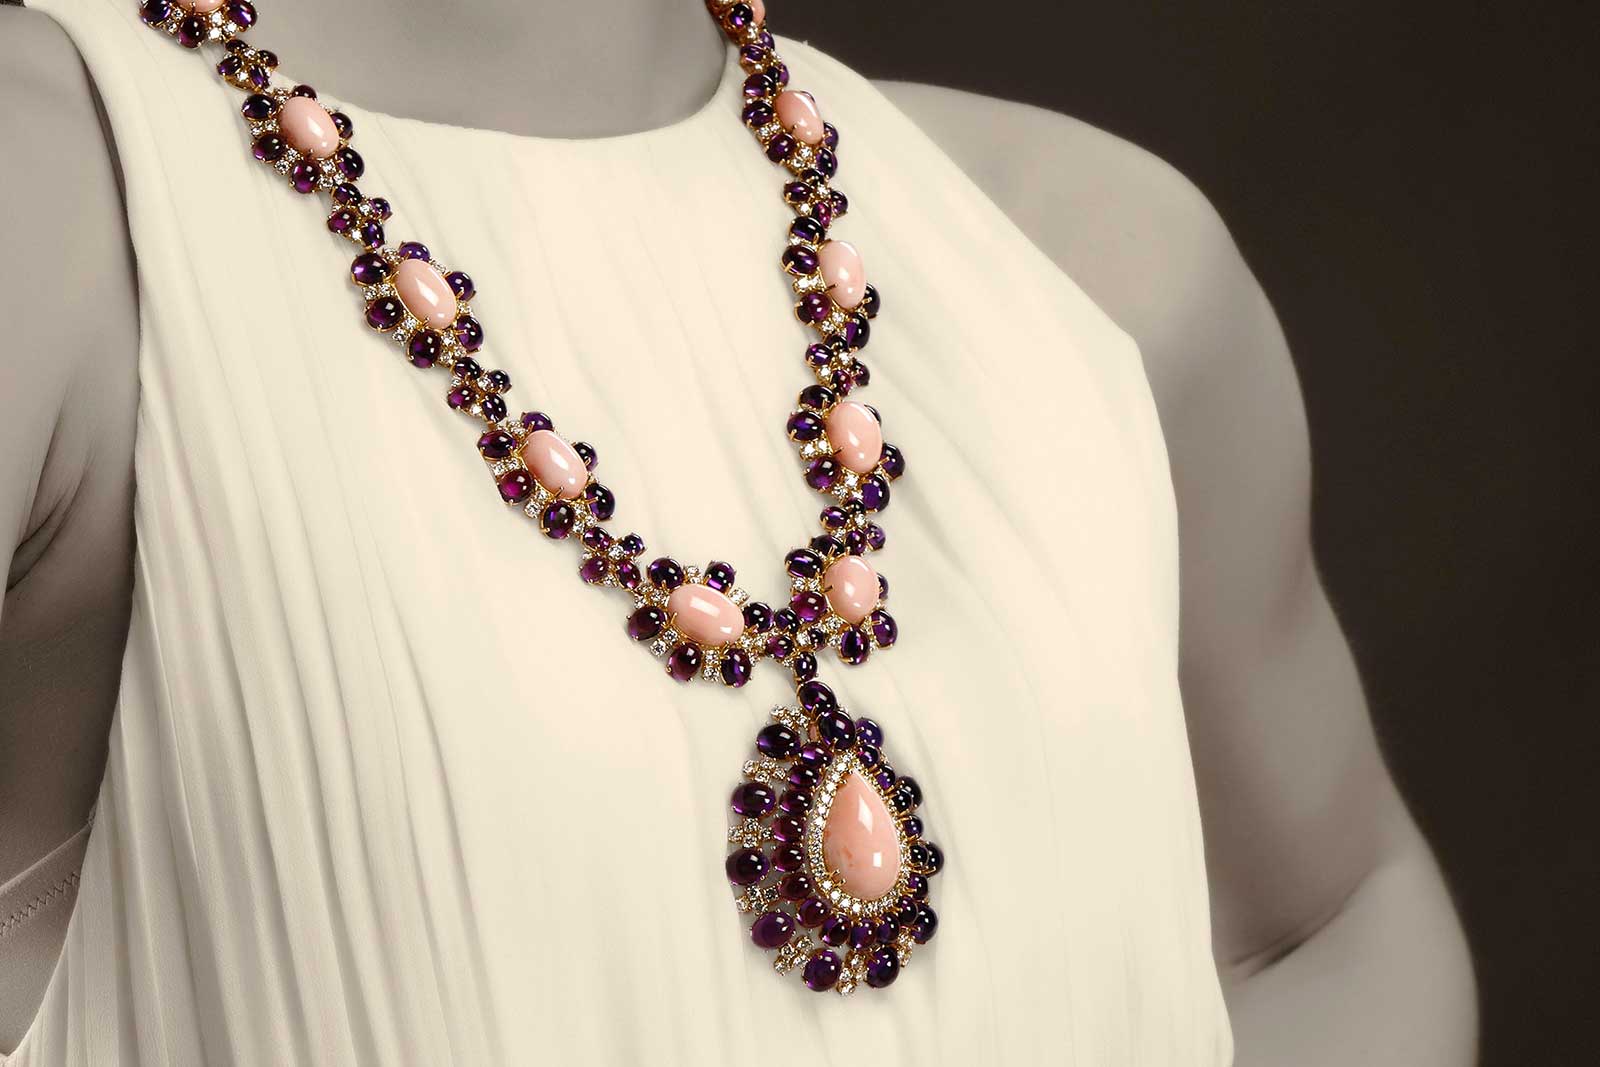 Veschetti sautoir necklace with coral and amethyst cabochons, accented with diamonds in yellow gold